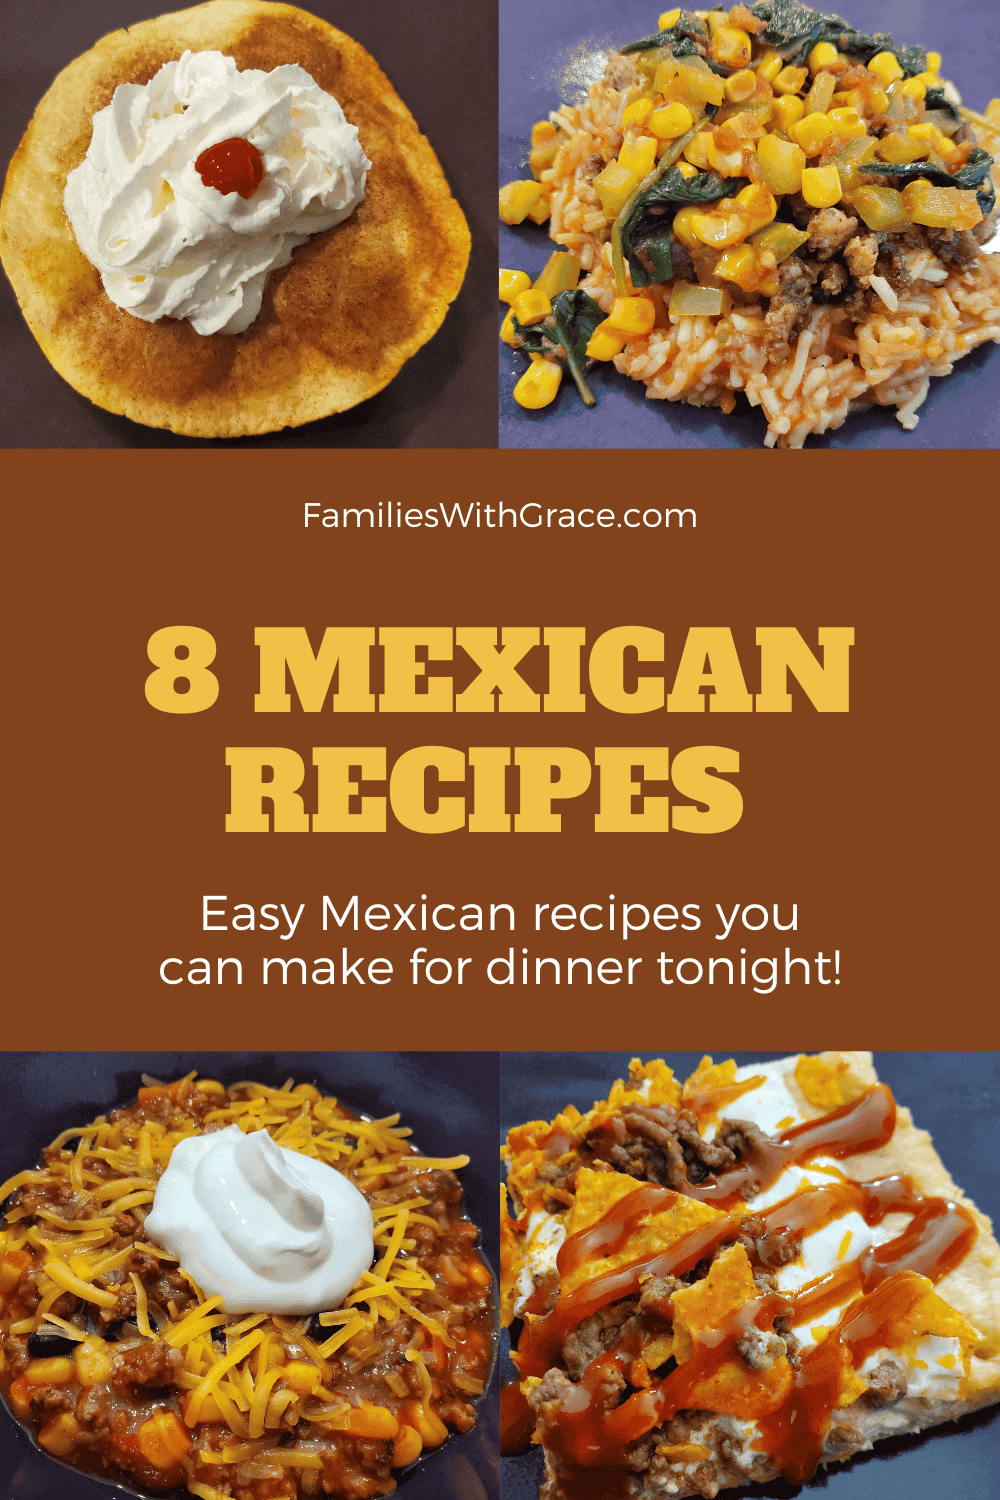 8 Mexican recipes your family will love